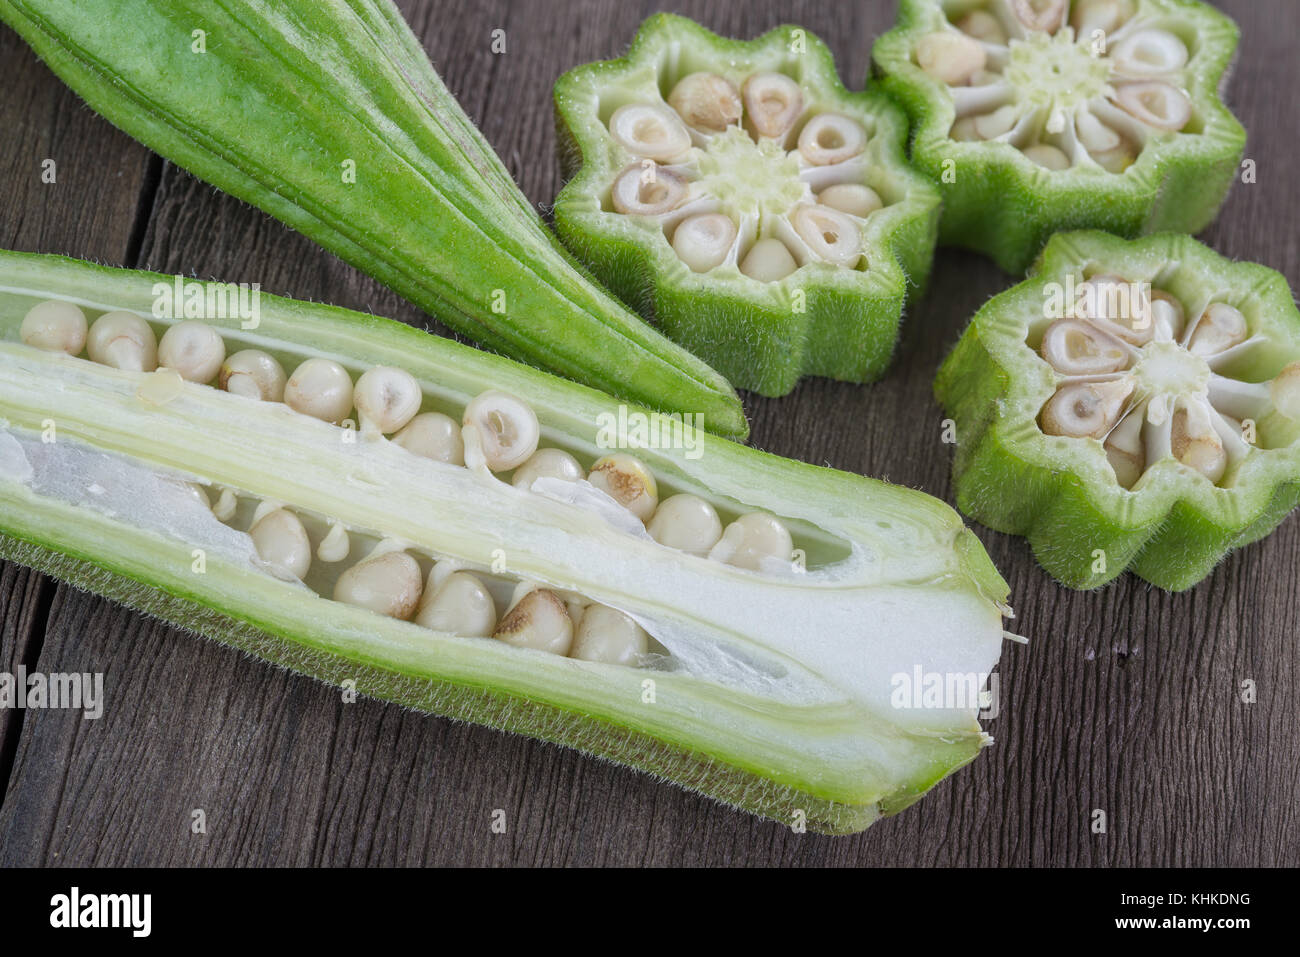 fresh  okra  vegetable also known as  lady's fingers on old wooden background Stock Photo